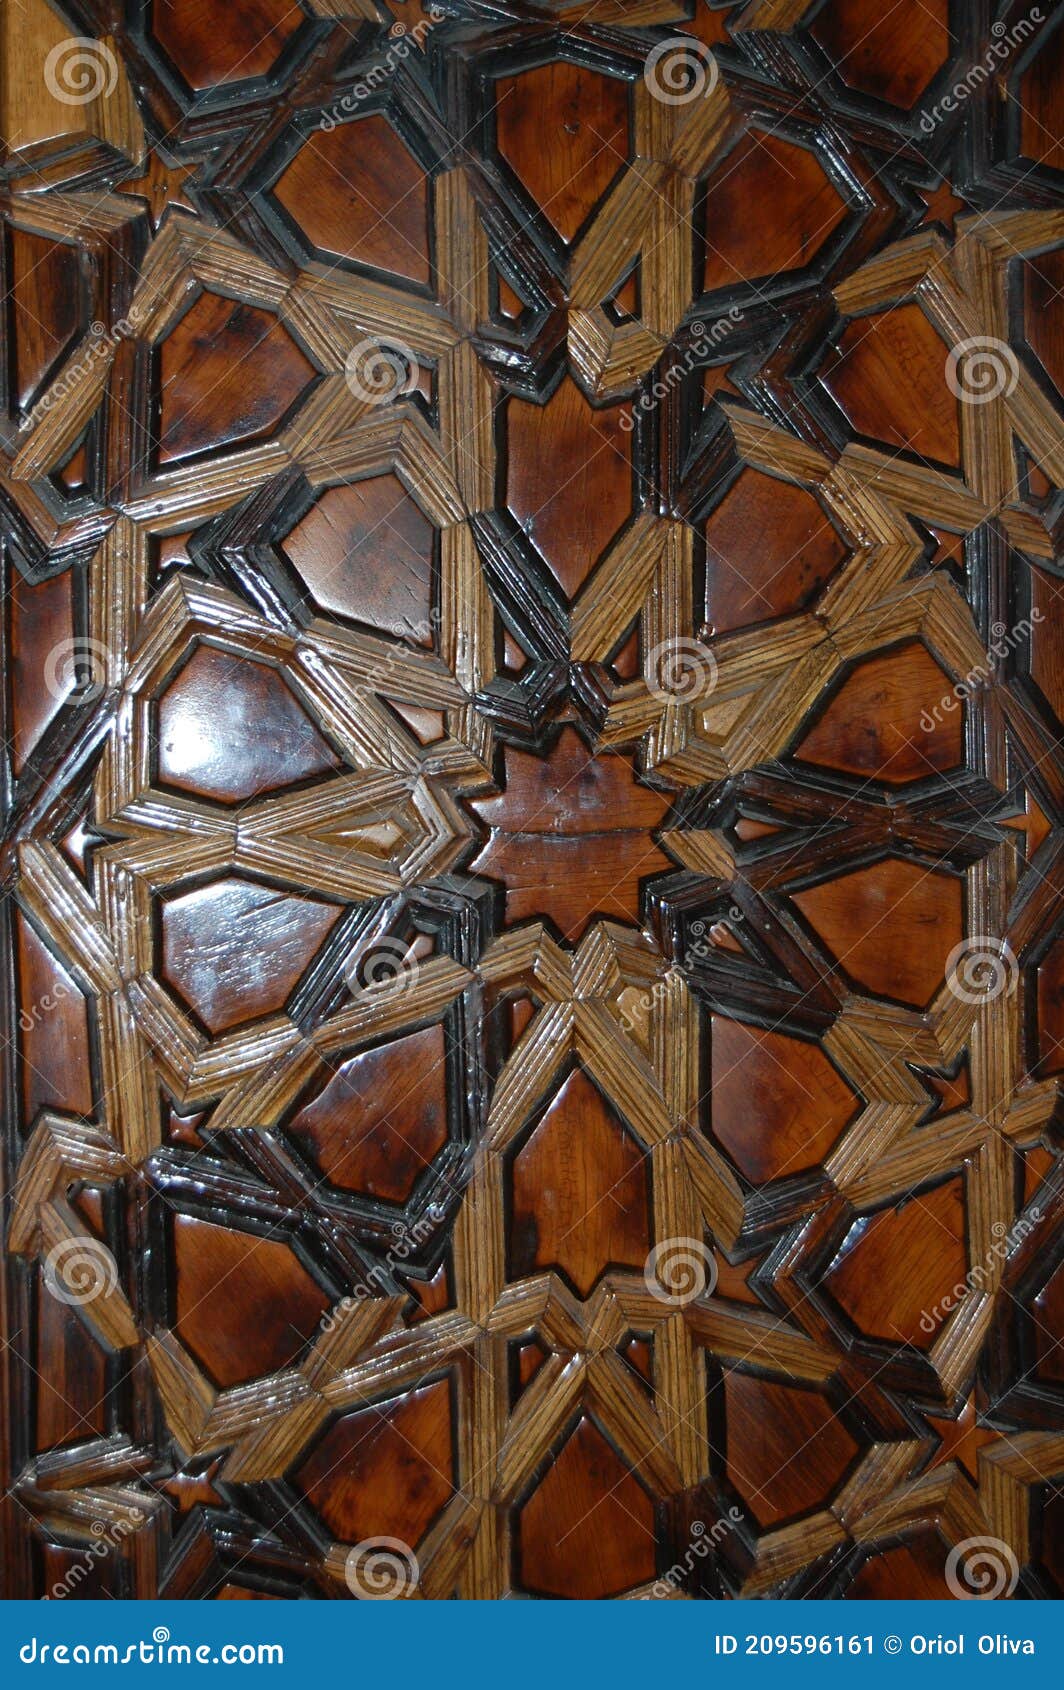 view of the topkapi palace, in istanbul turkey. wooden door